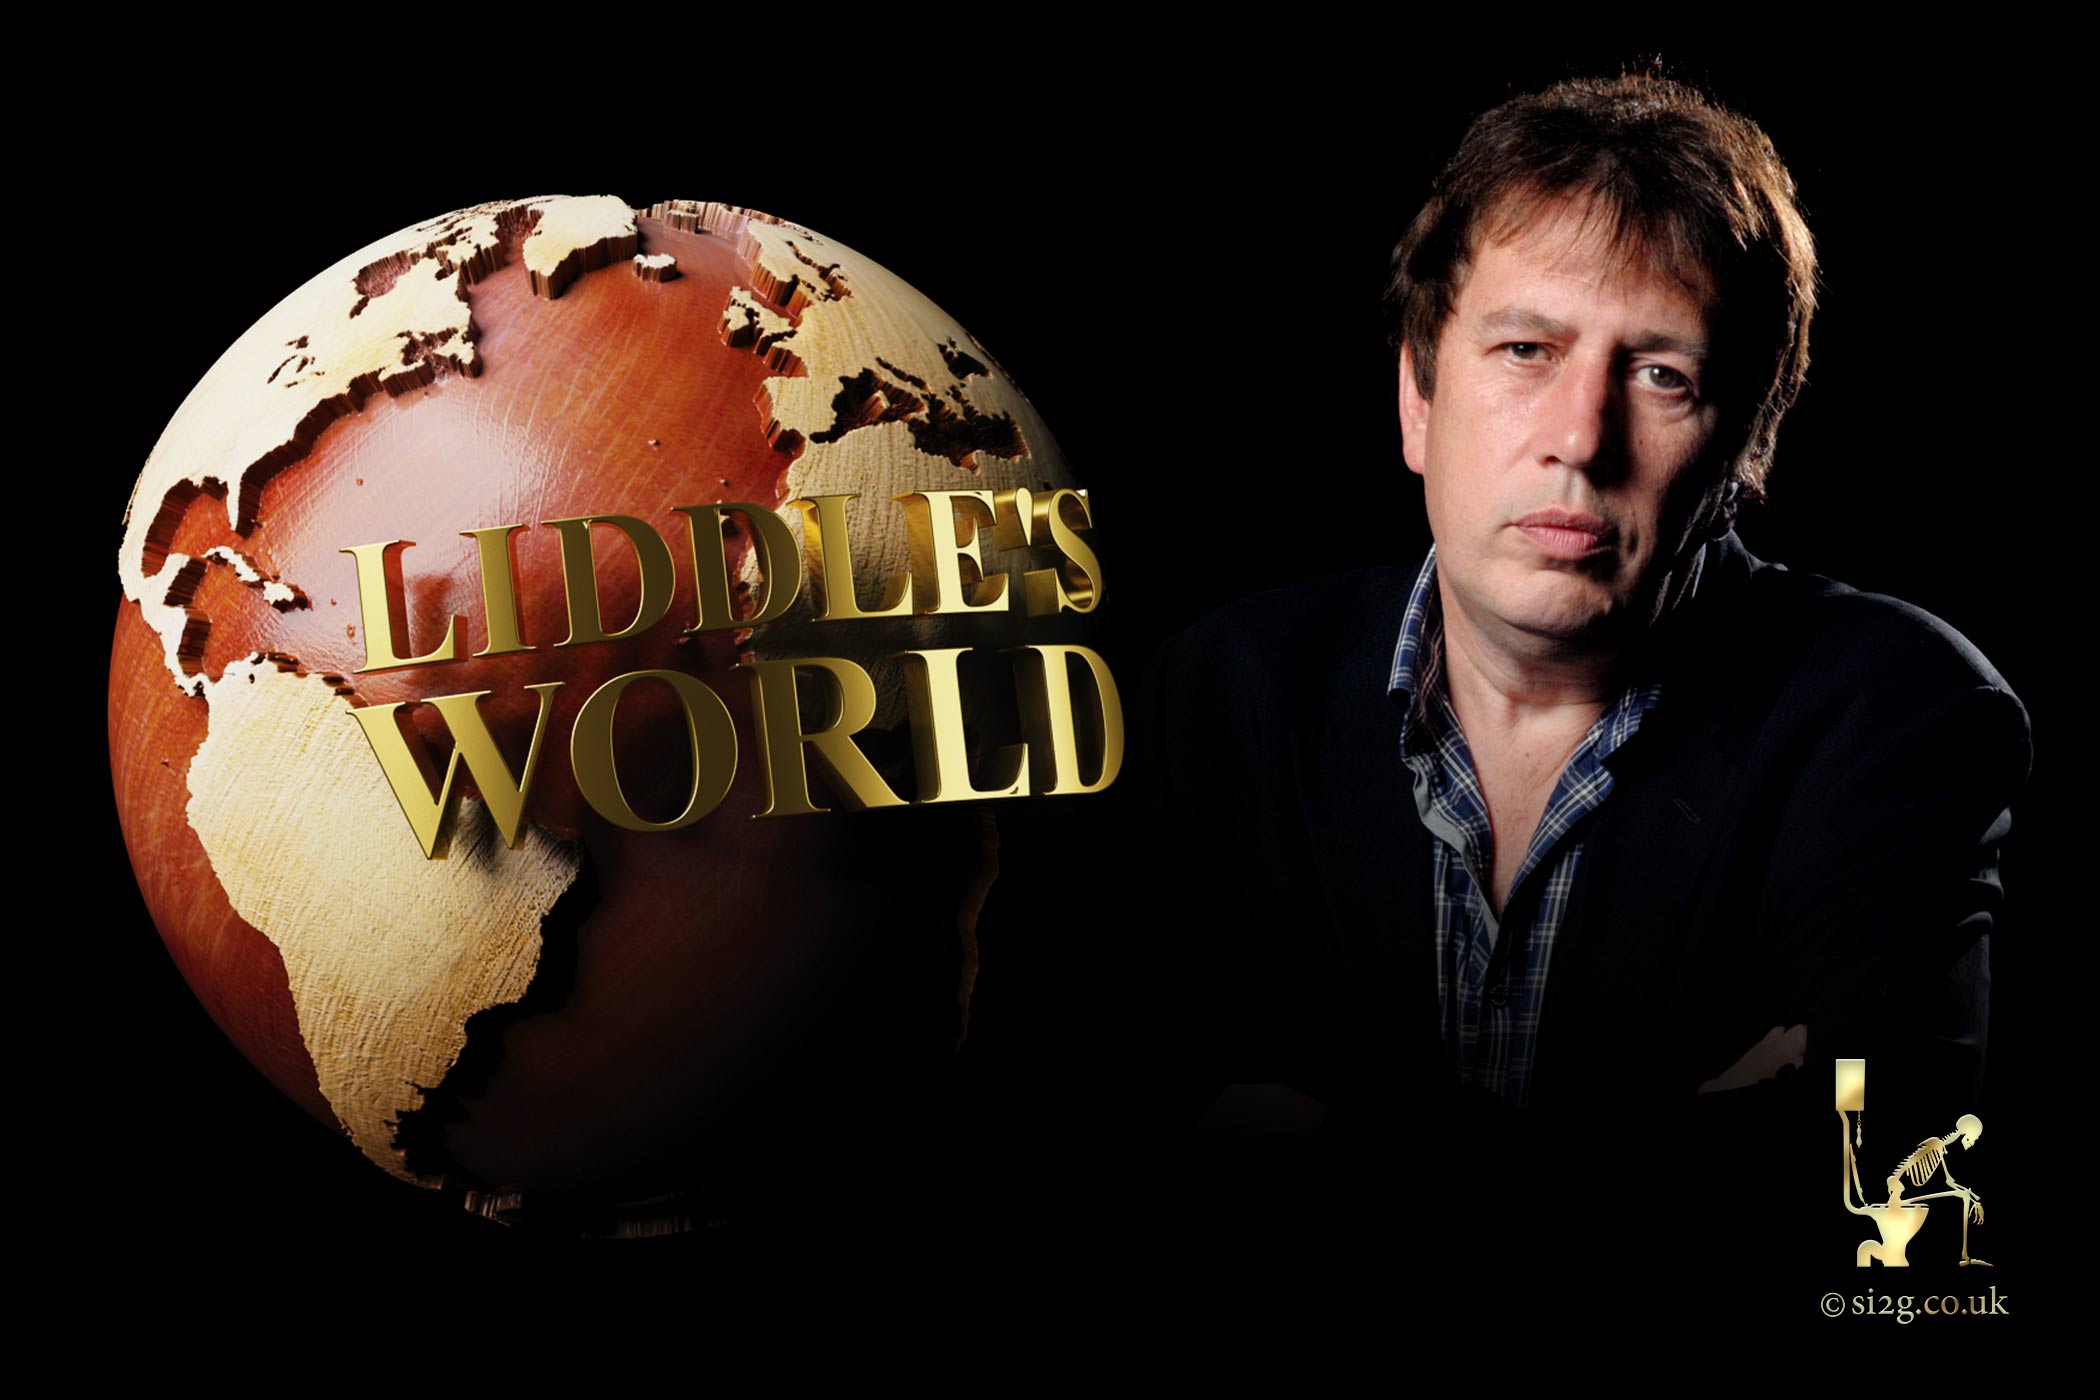 Liddles World - Animated motion graphics and print design for TV production.  We set up our shoot in the Hospital Club studio and filmed Rod Liddle against a black background.  We then designed a wooden globe in 3D and composited it to form a title sequence, publicity and TX card.